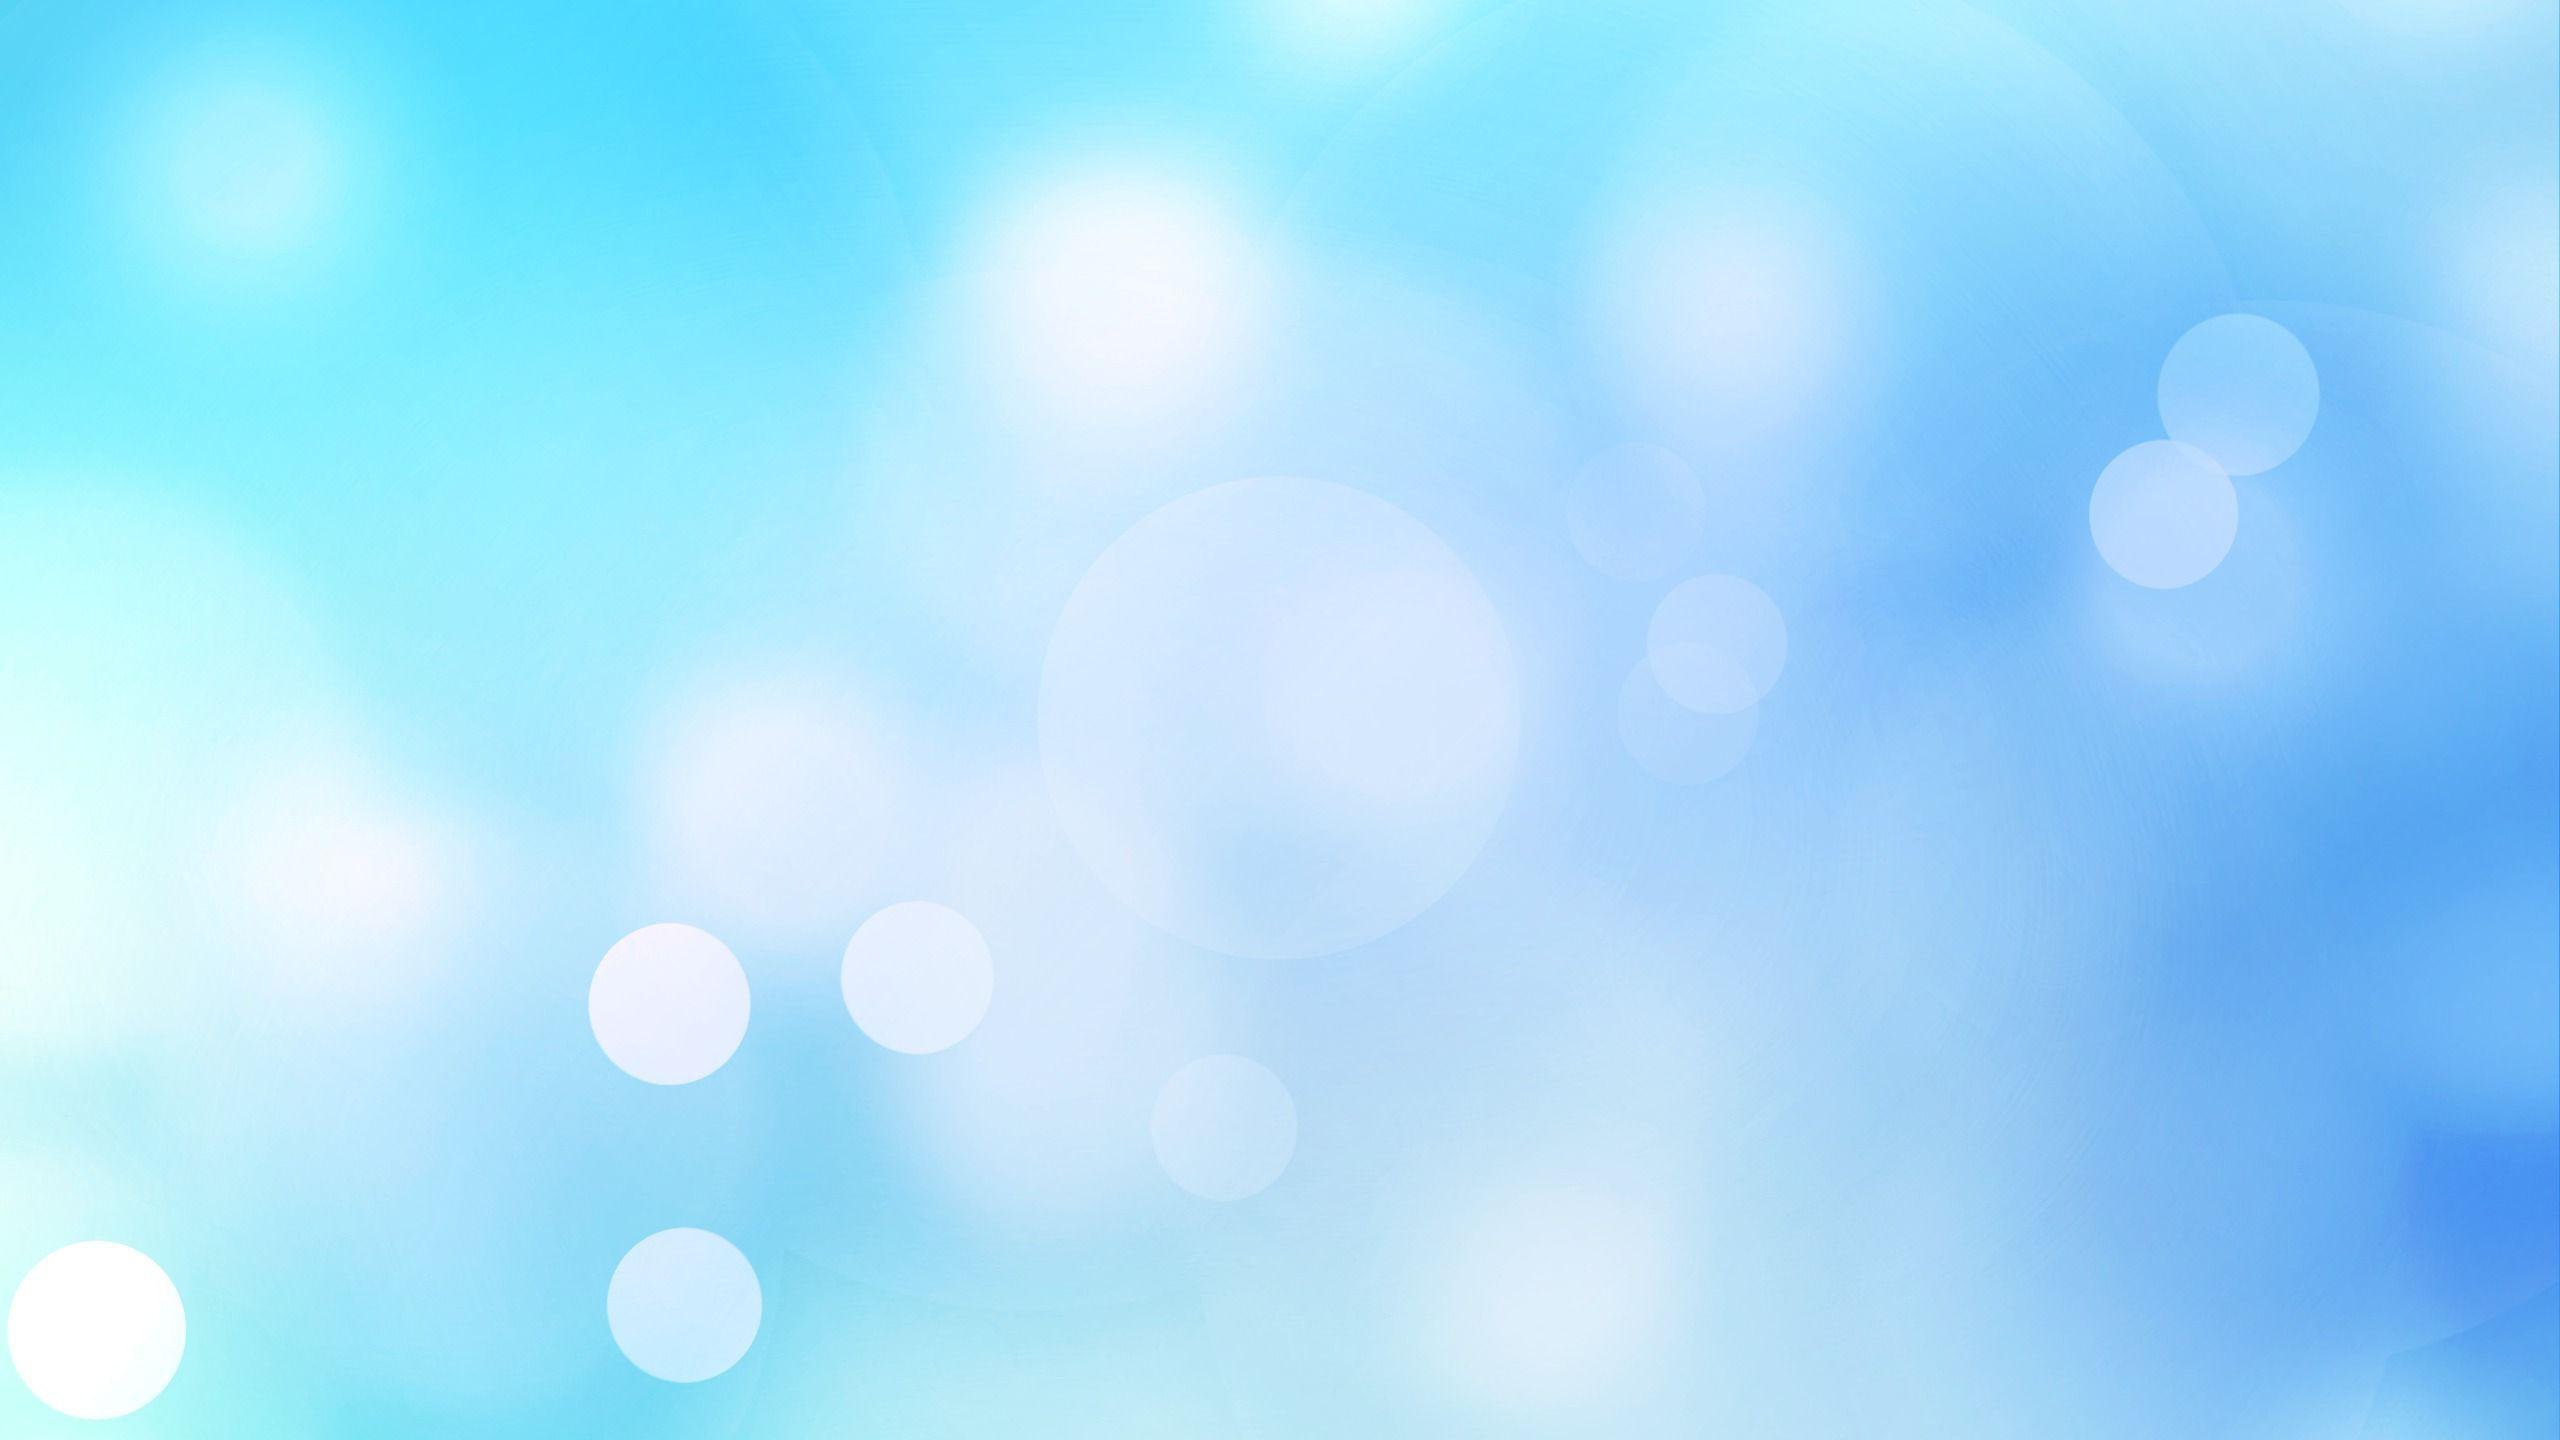 Wallpaper Blue and White Light Illustration Background  Download Free  Image